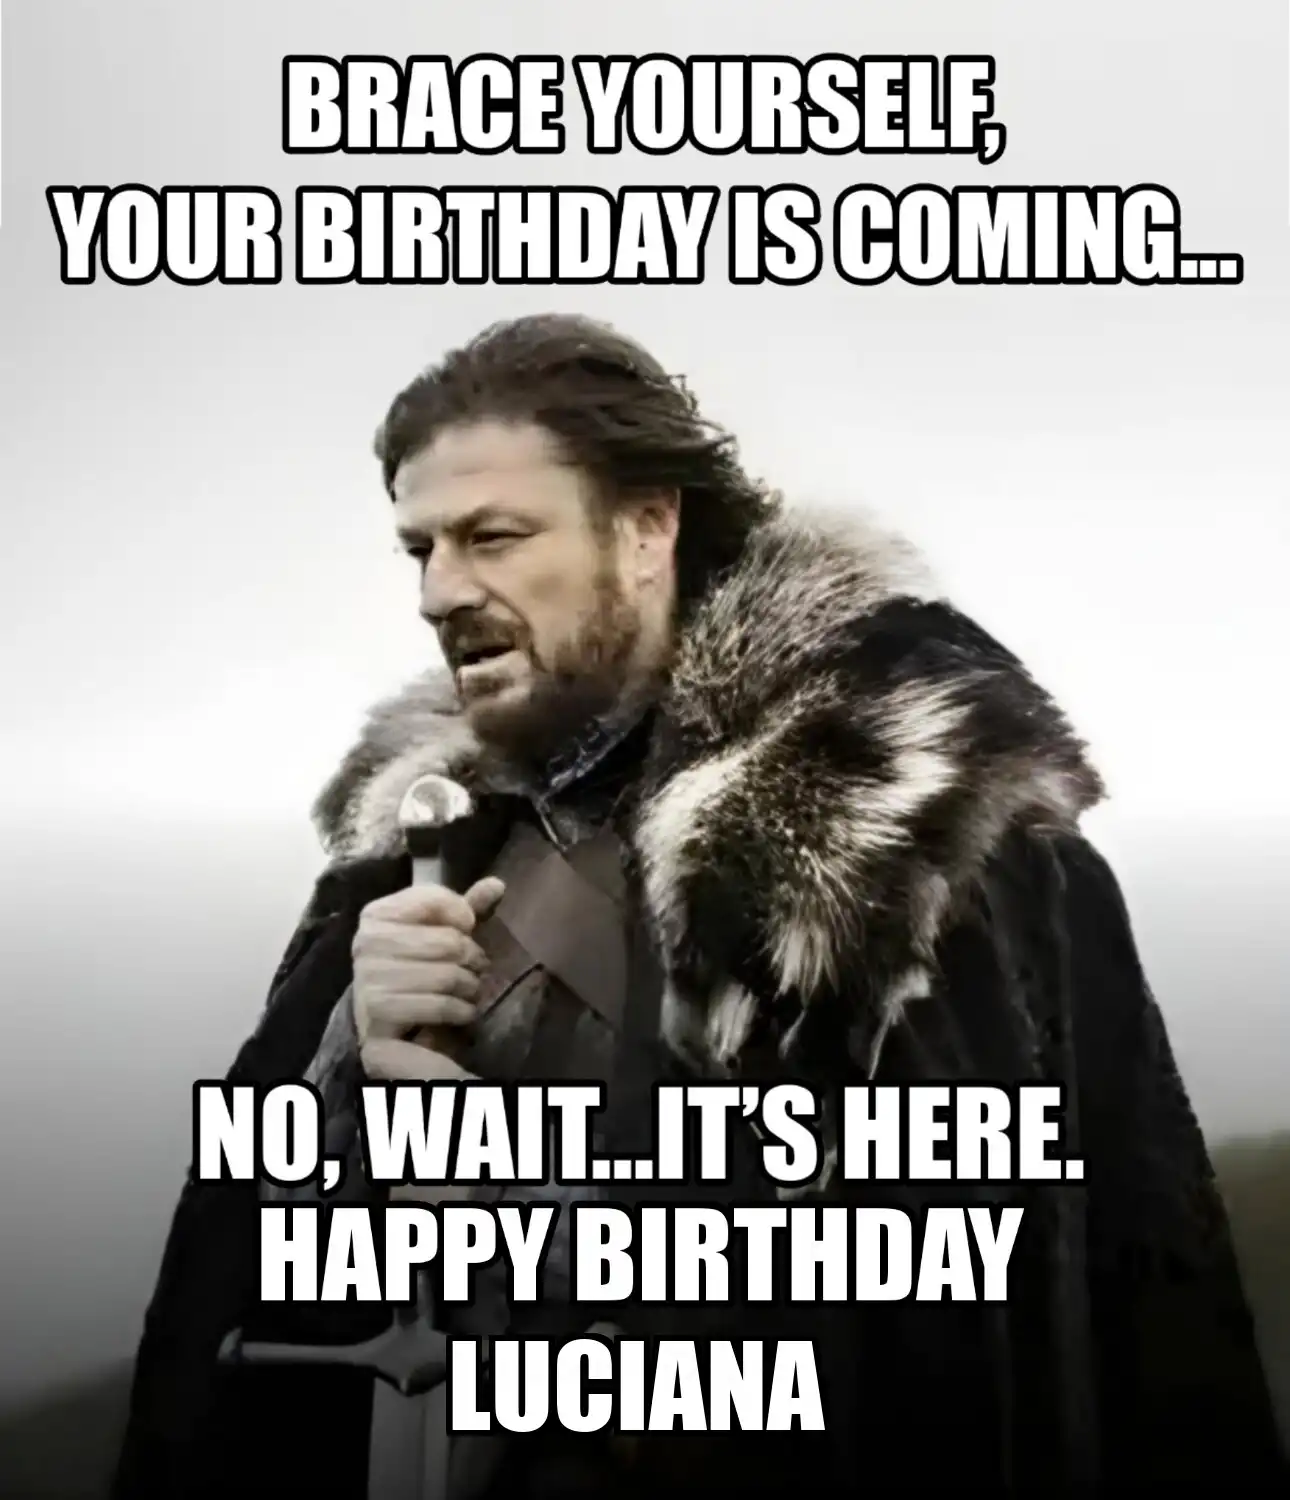 Happy Birthday Luciana Brace Yourself Your Birthday Is Coming Meme